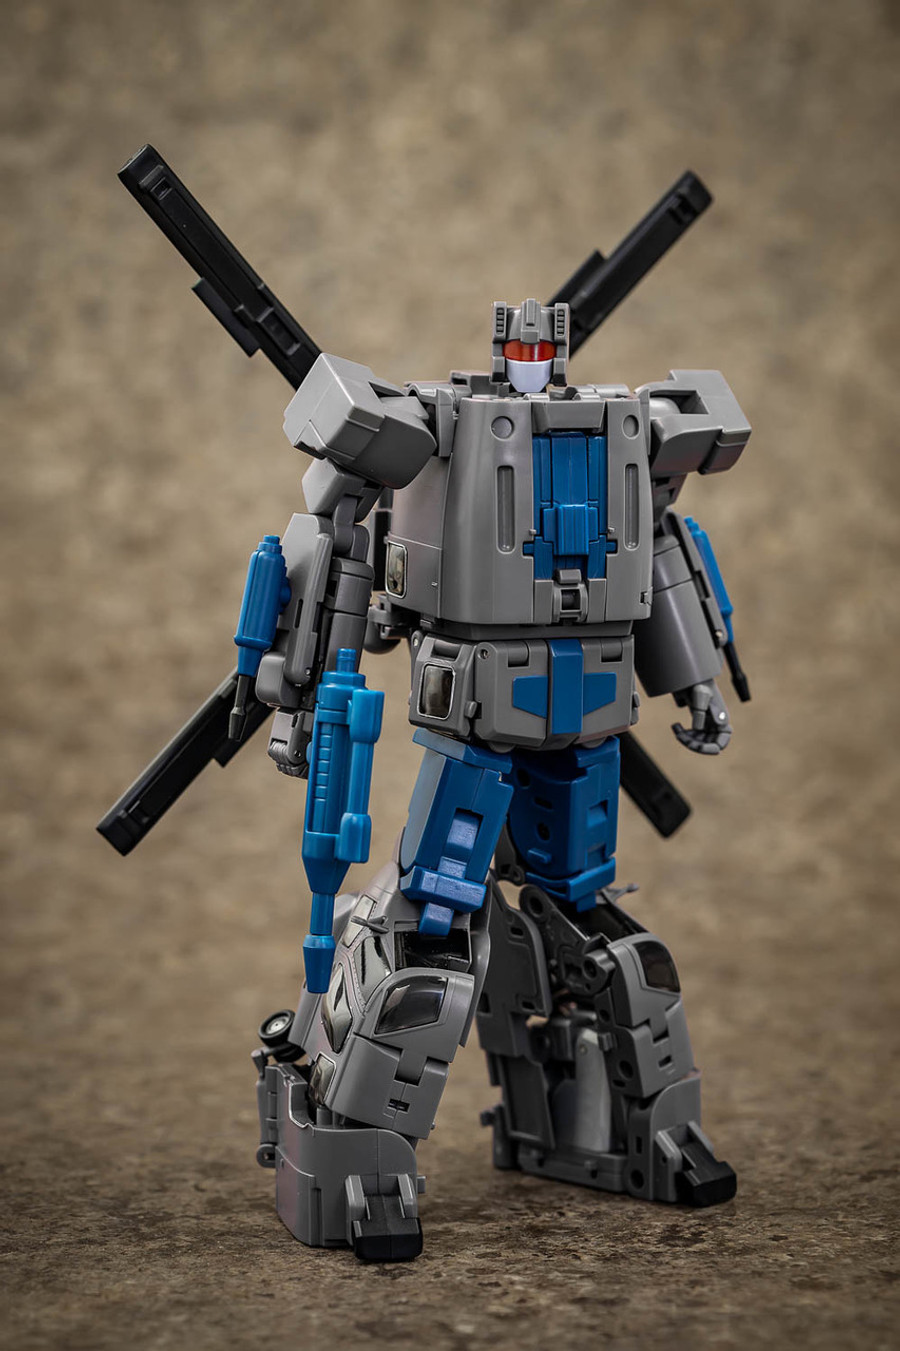 Transformers News: Ages Three and Up Product Updates - August 9, 2019